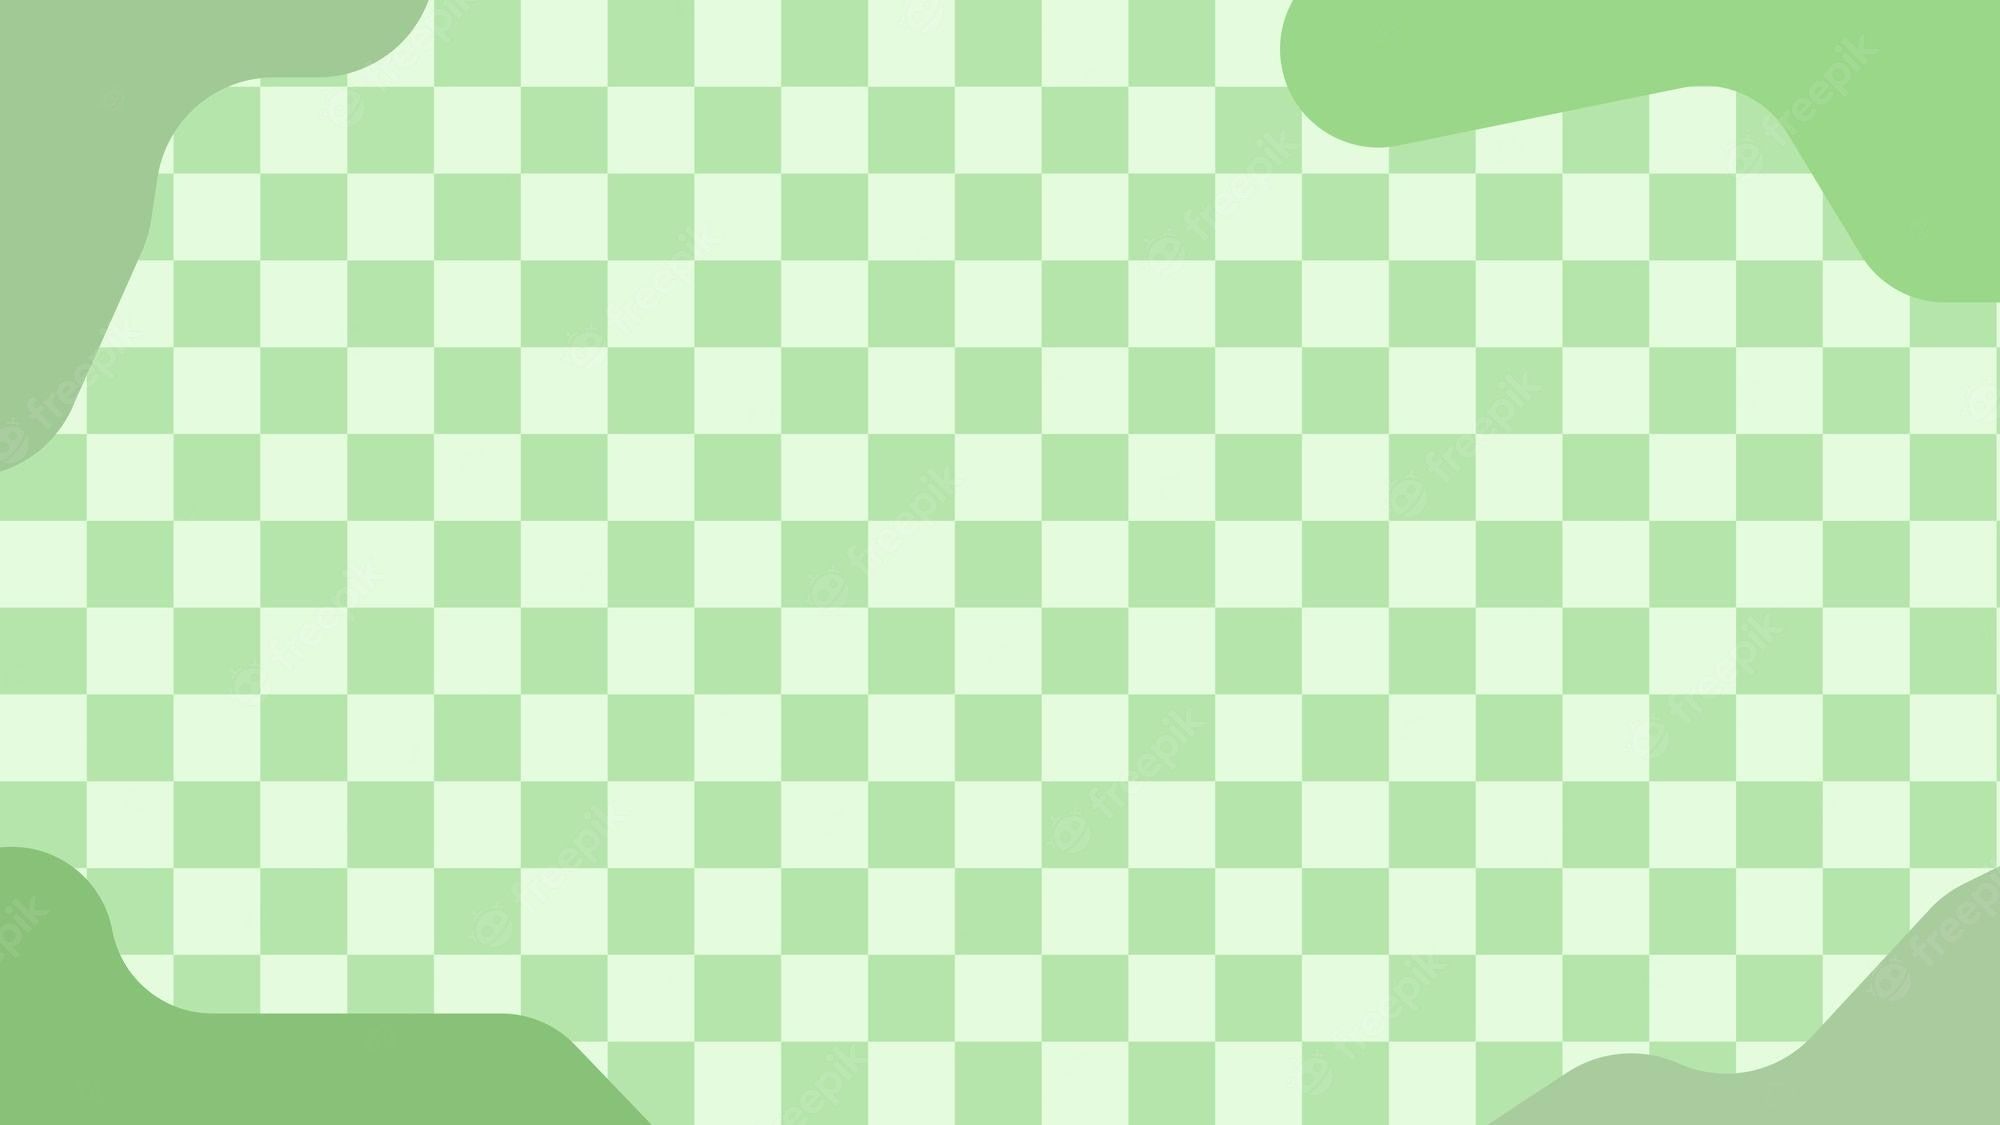 A green and white checkered background with a green blob on the left and right sides - Soft green, mint green, light green